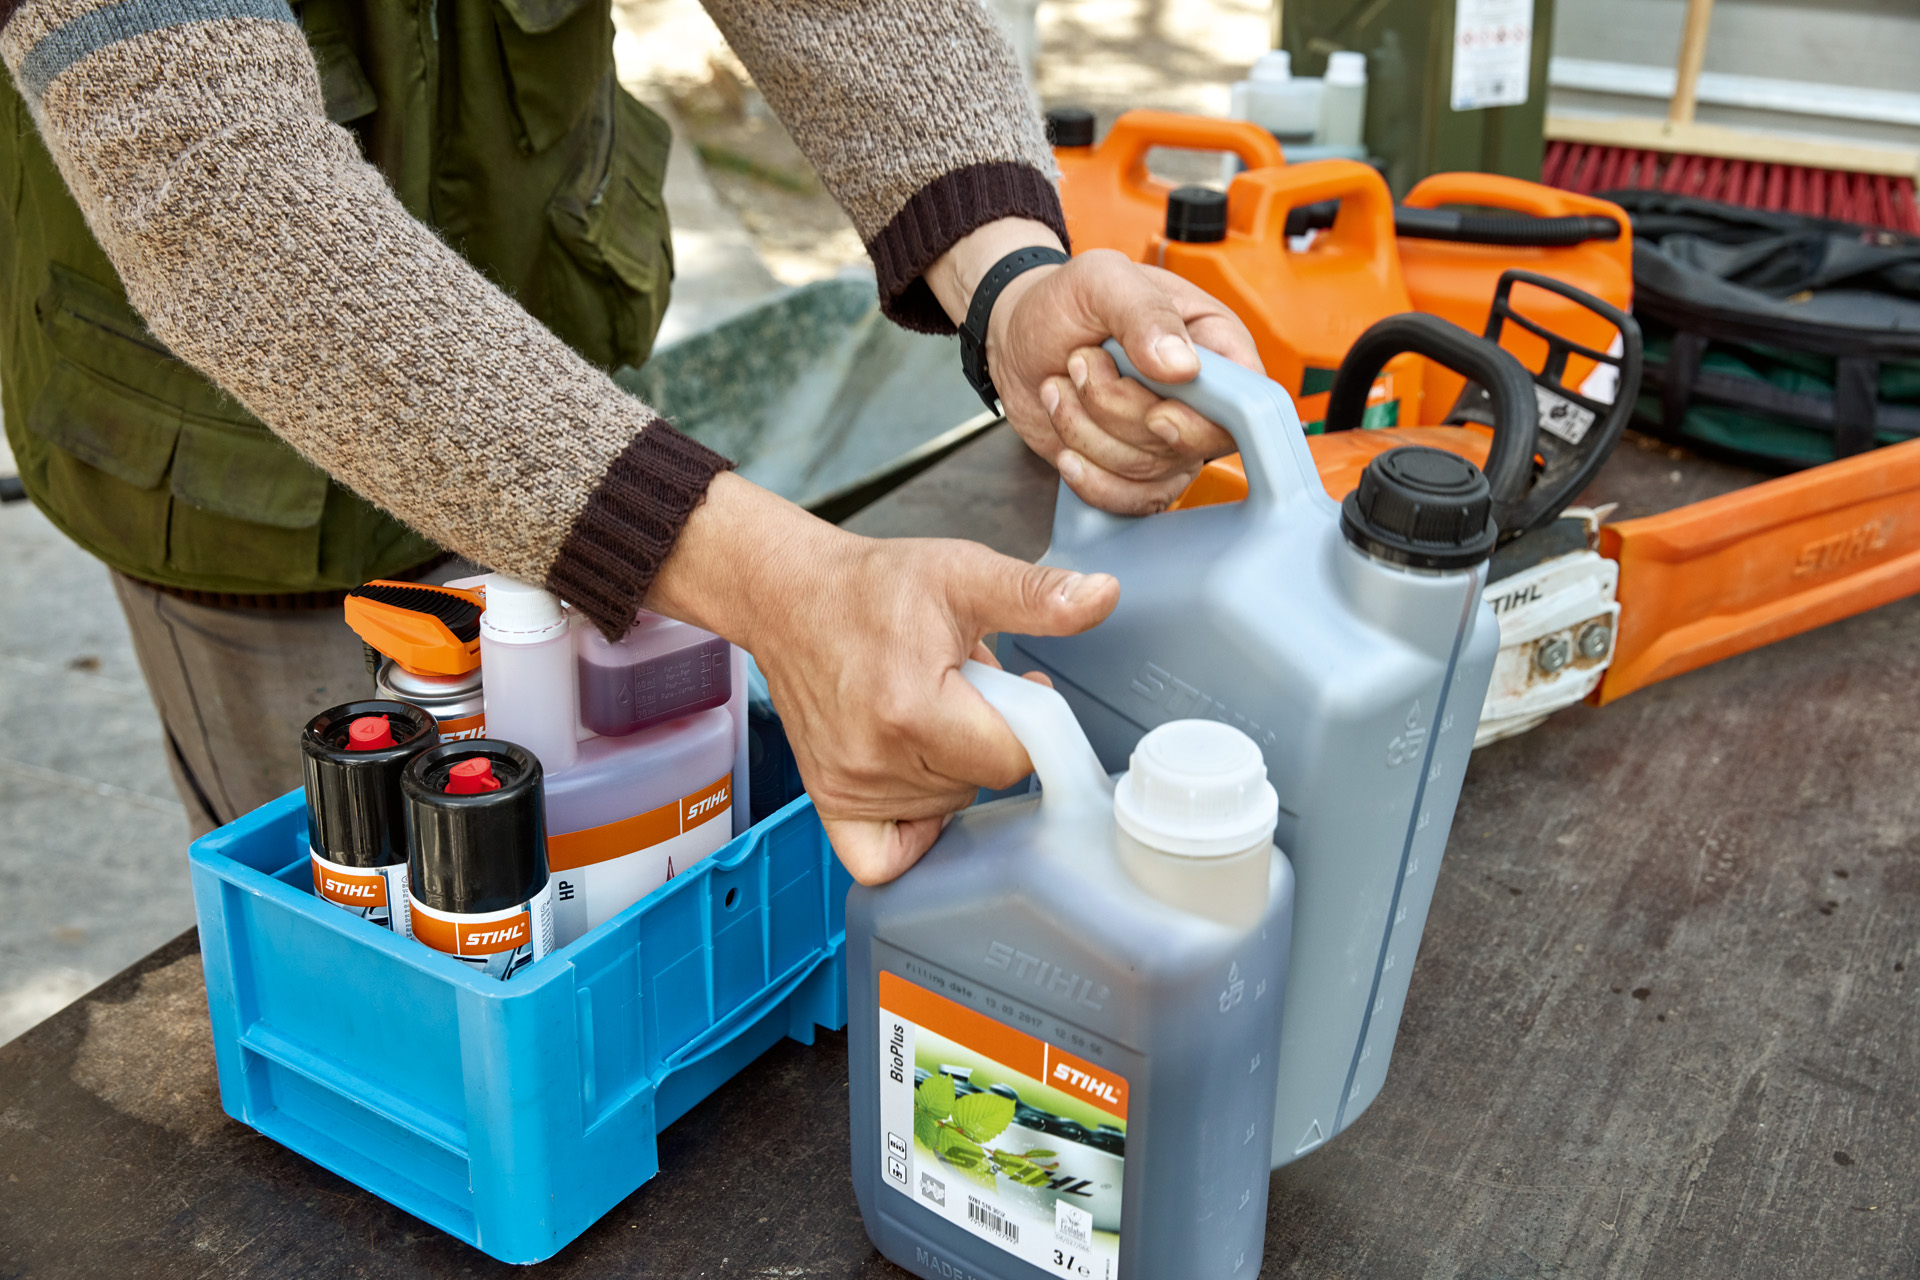 STIHL canisters are suitable for transport.